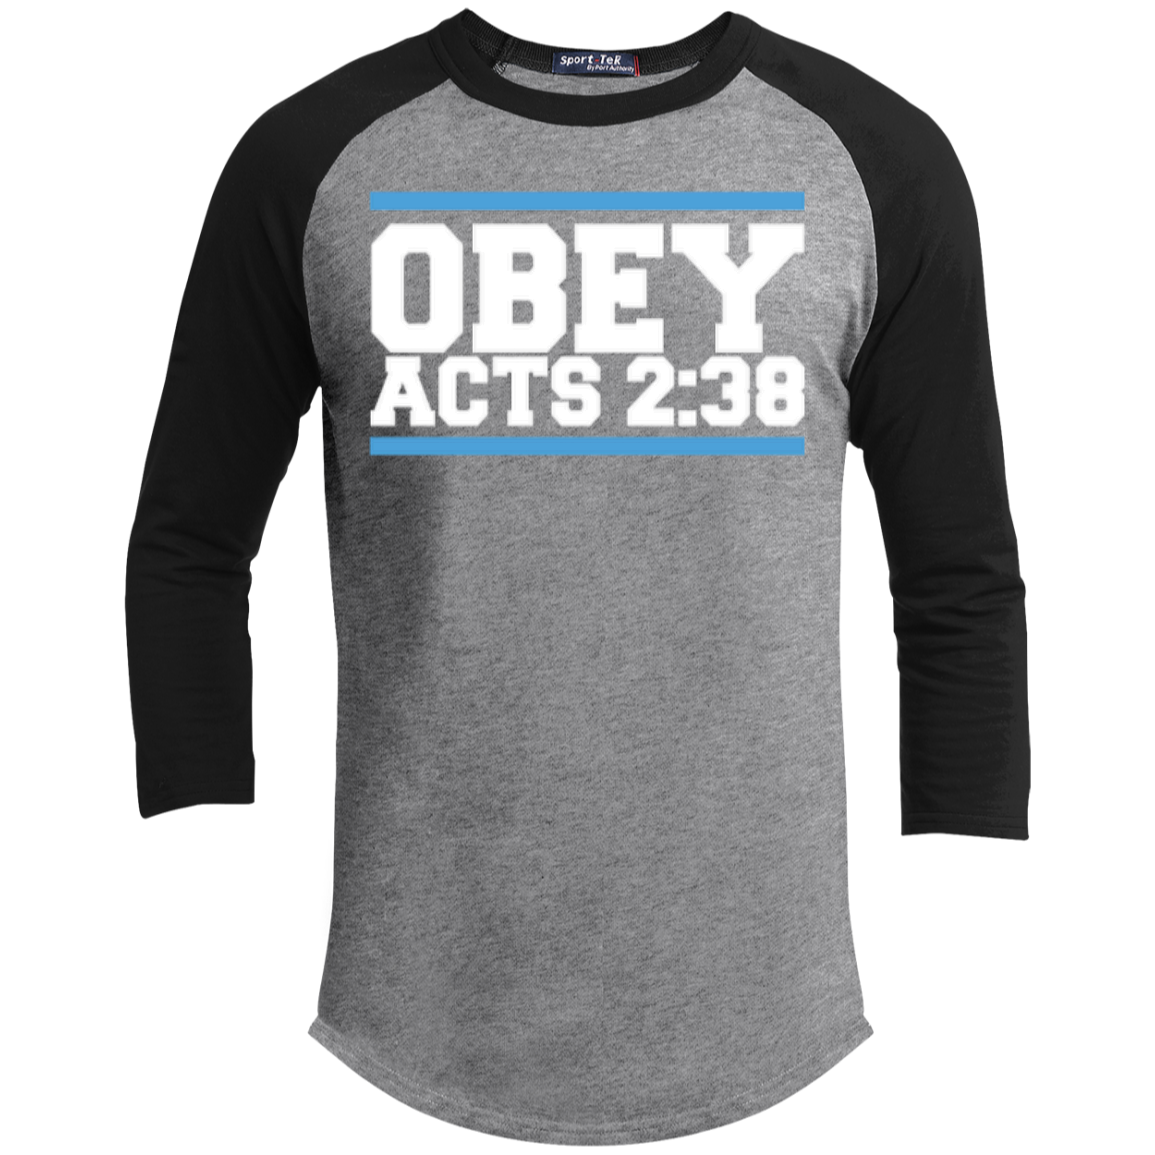 Obey Acts 2:38 - Sporty 3/4 Length Tee Shirt - Kick Merch - 4